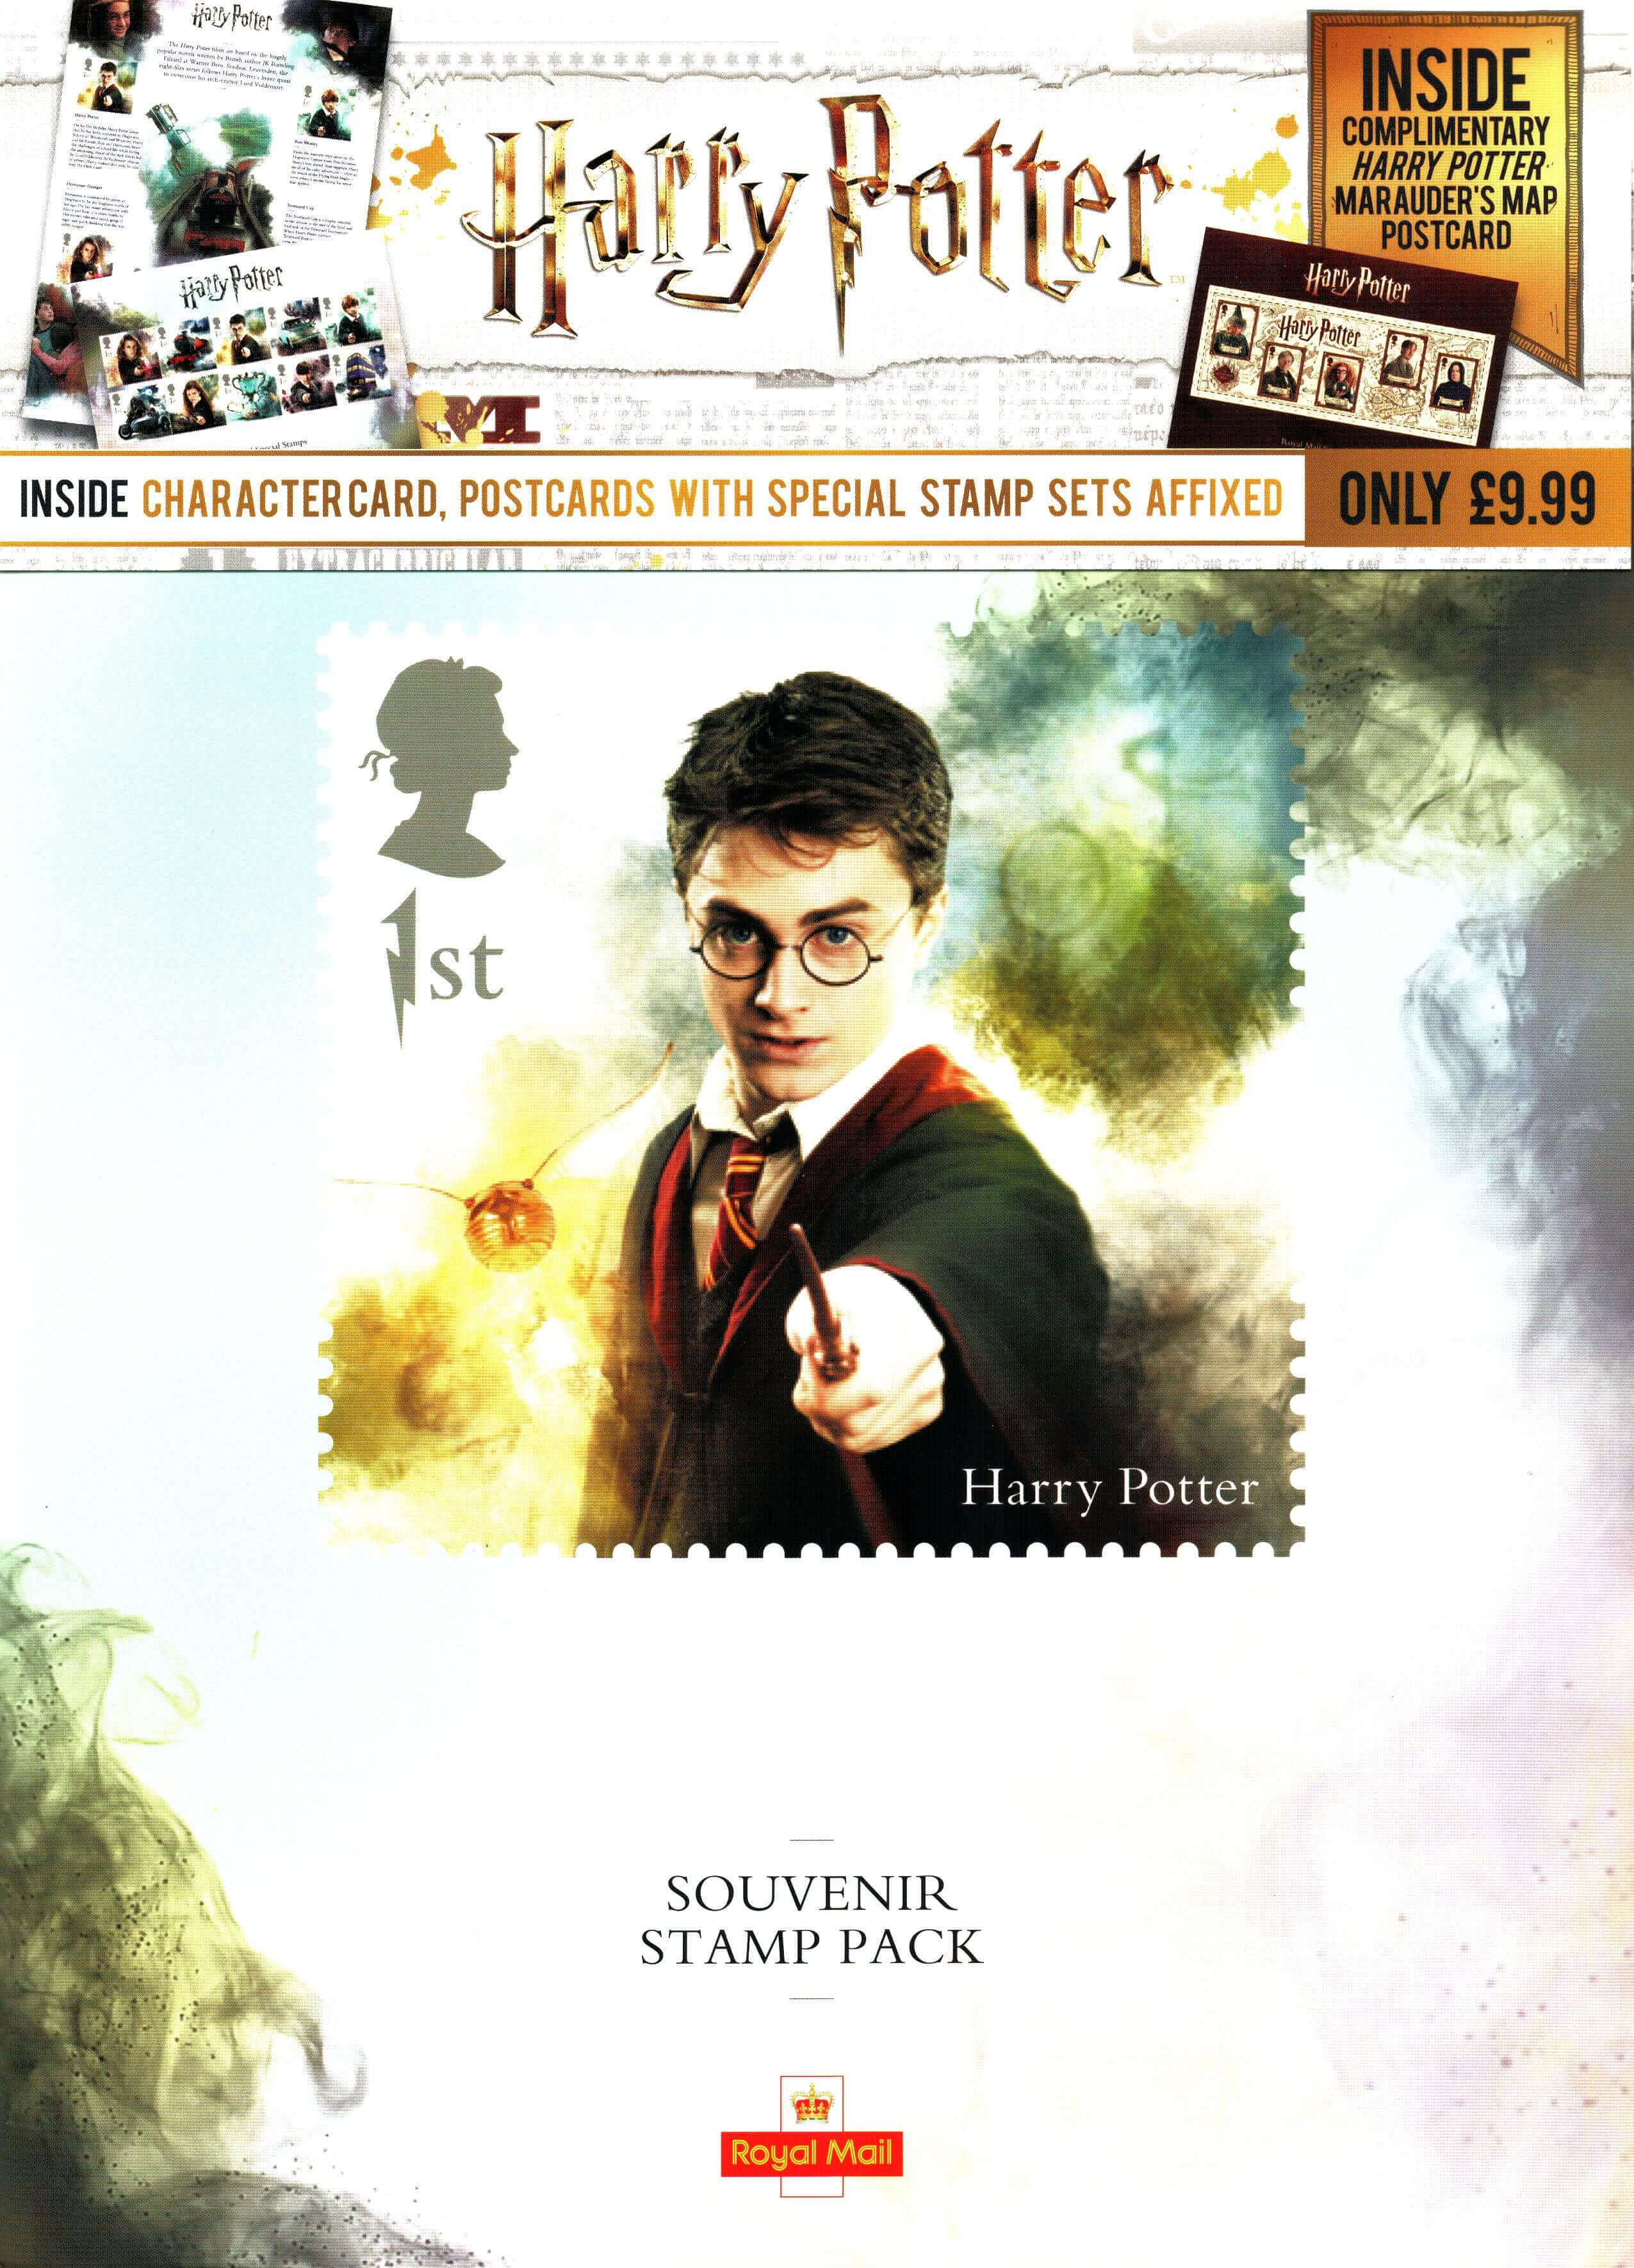 Harry Potter: Royal Mail to Release Harry Potter Commemorative